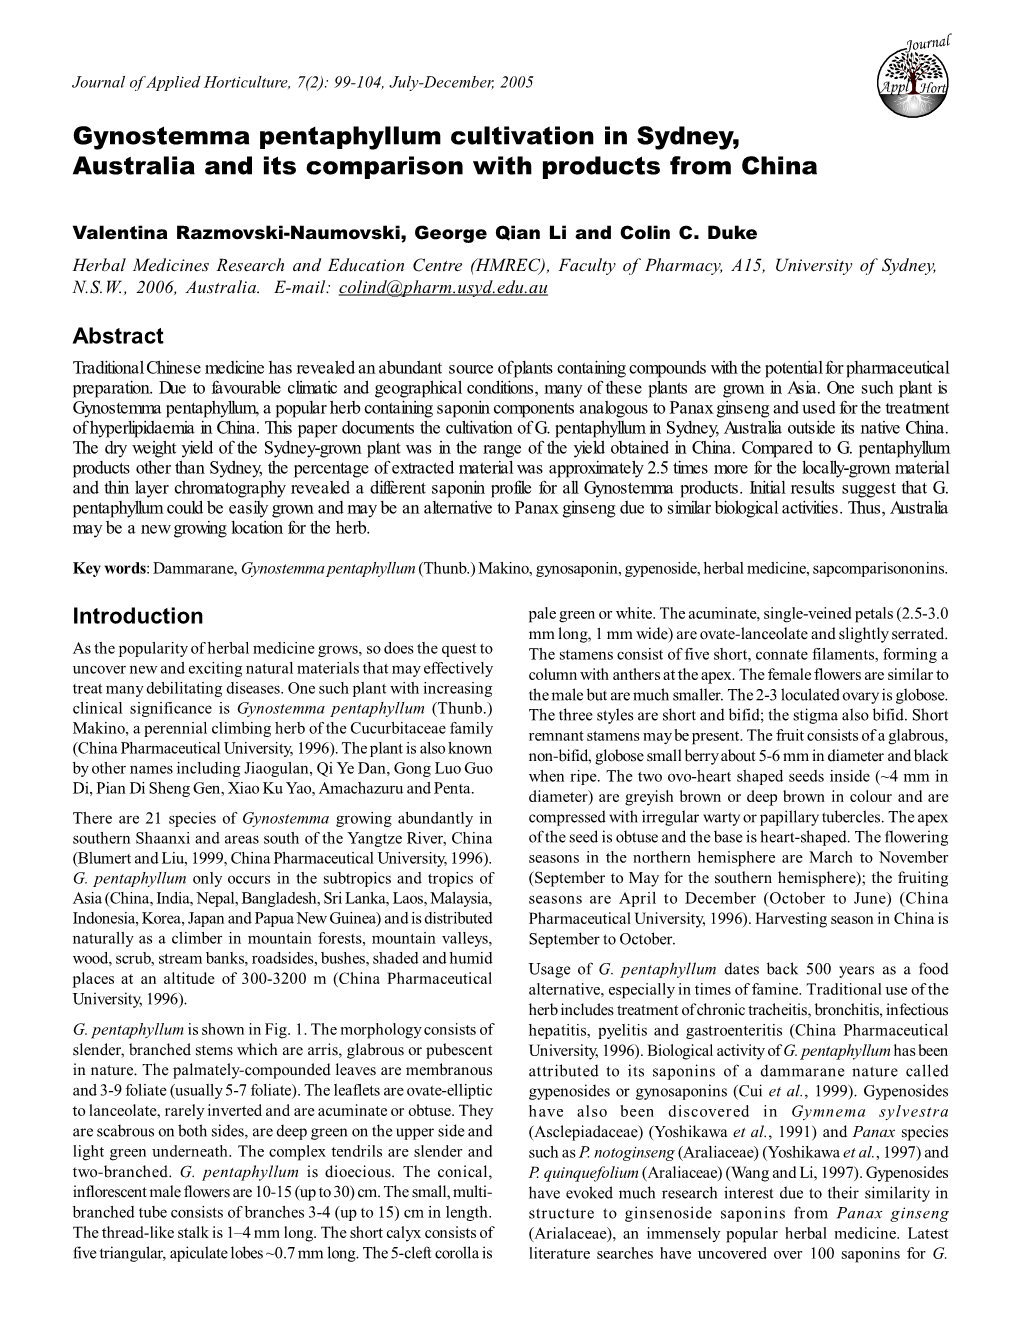 Gynostemma Pentaphyllum Cultivation in Sydney, Australia and Its Comparison with Products from China